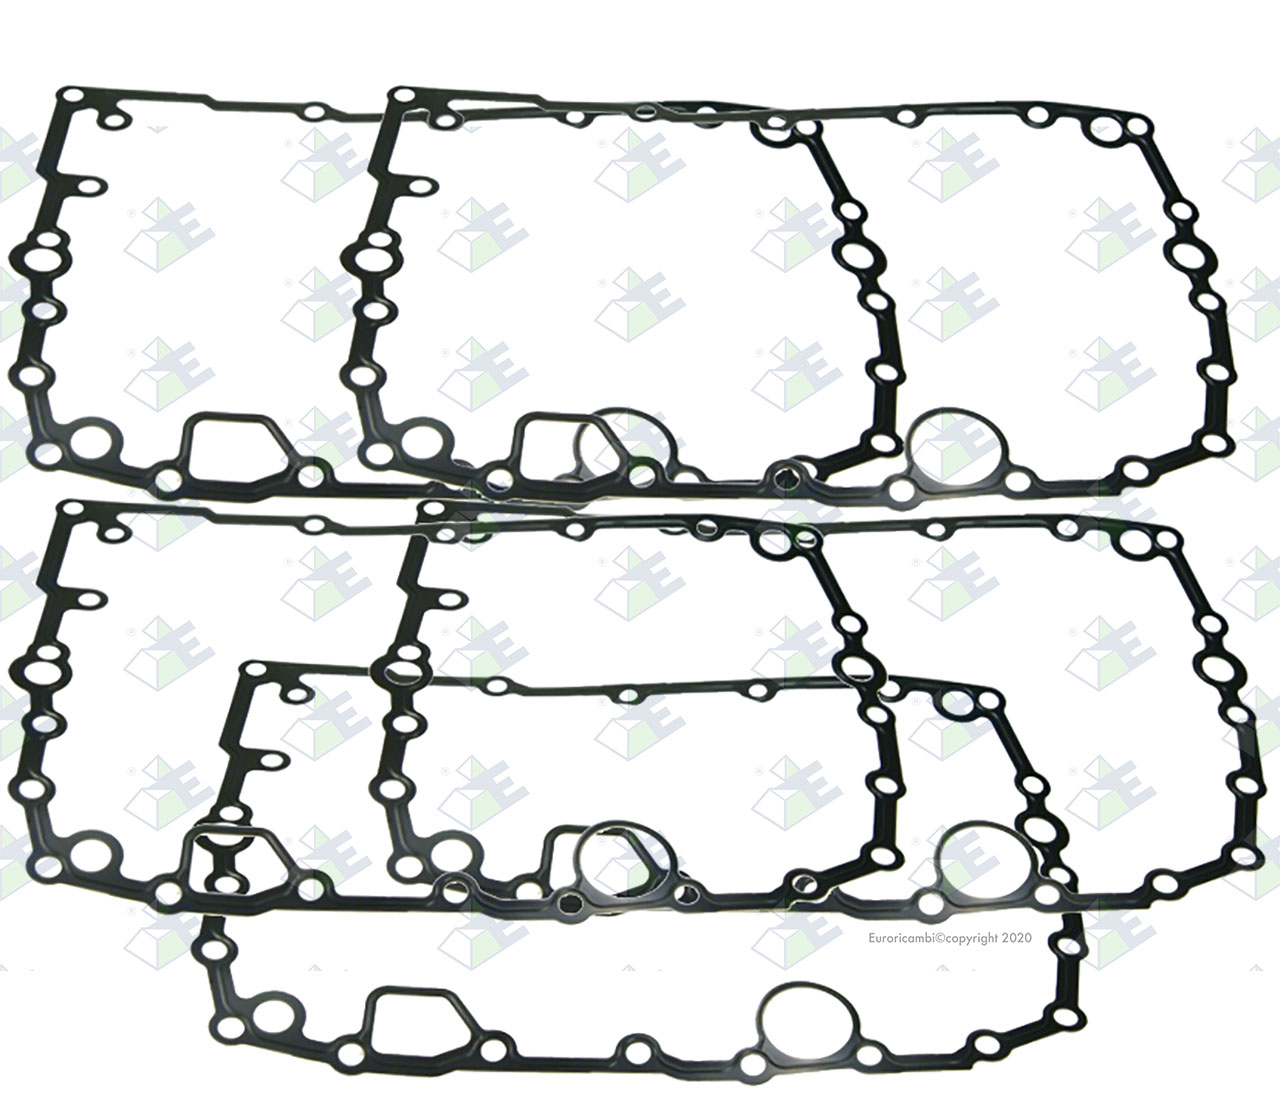 SHEET GASKET suitable to ZF TRANSMISSIONS 1315301233